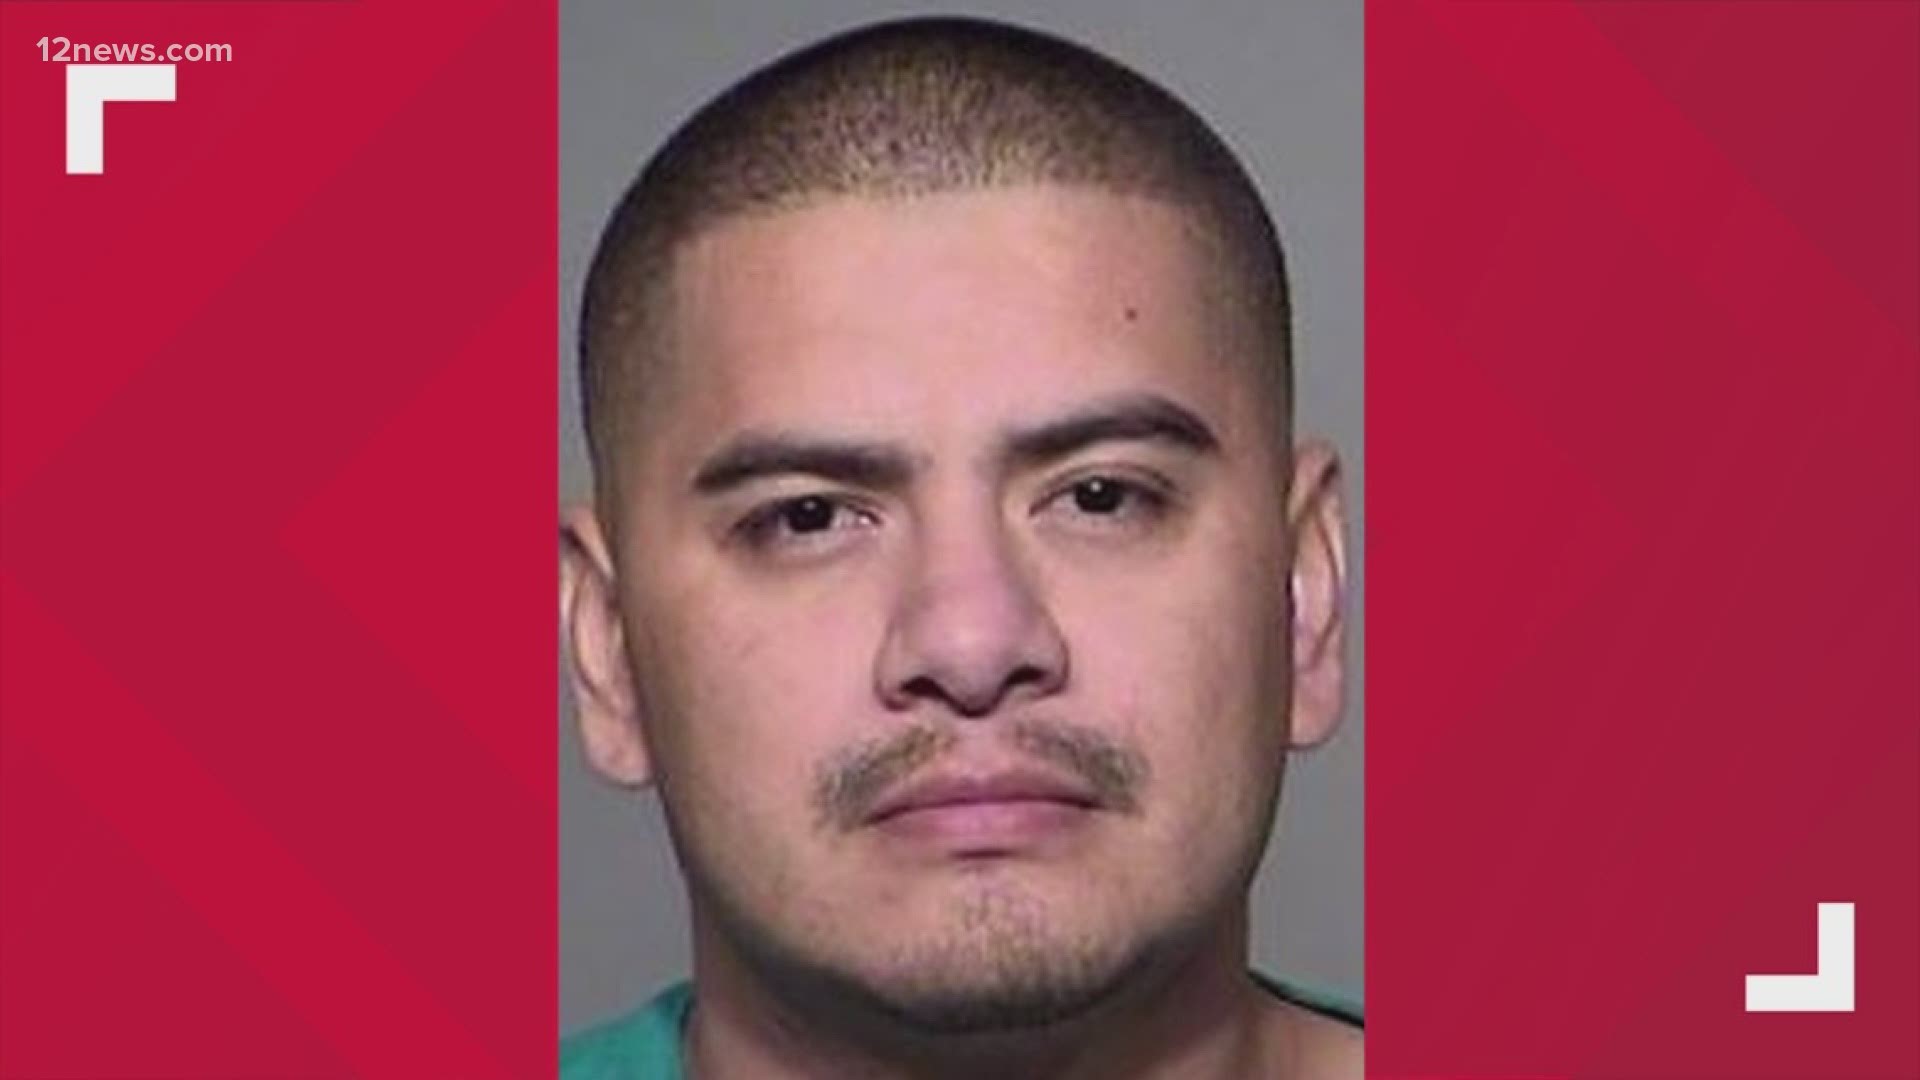 A missing 15-year-old girl was found during a traffic stop in Nevada on Monday night. Police say a Phoenix man likely arranged for her to be transported to him.